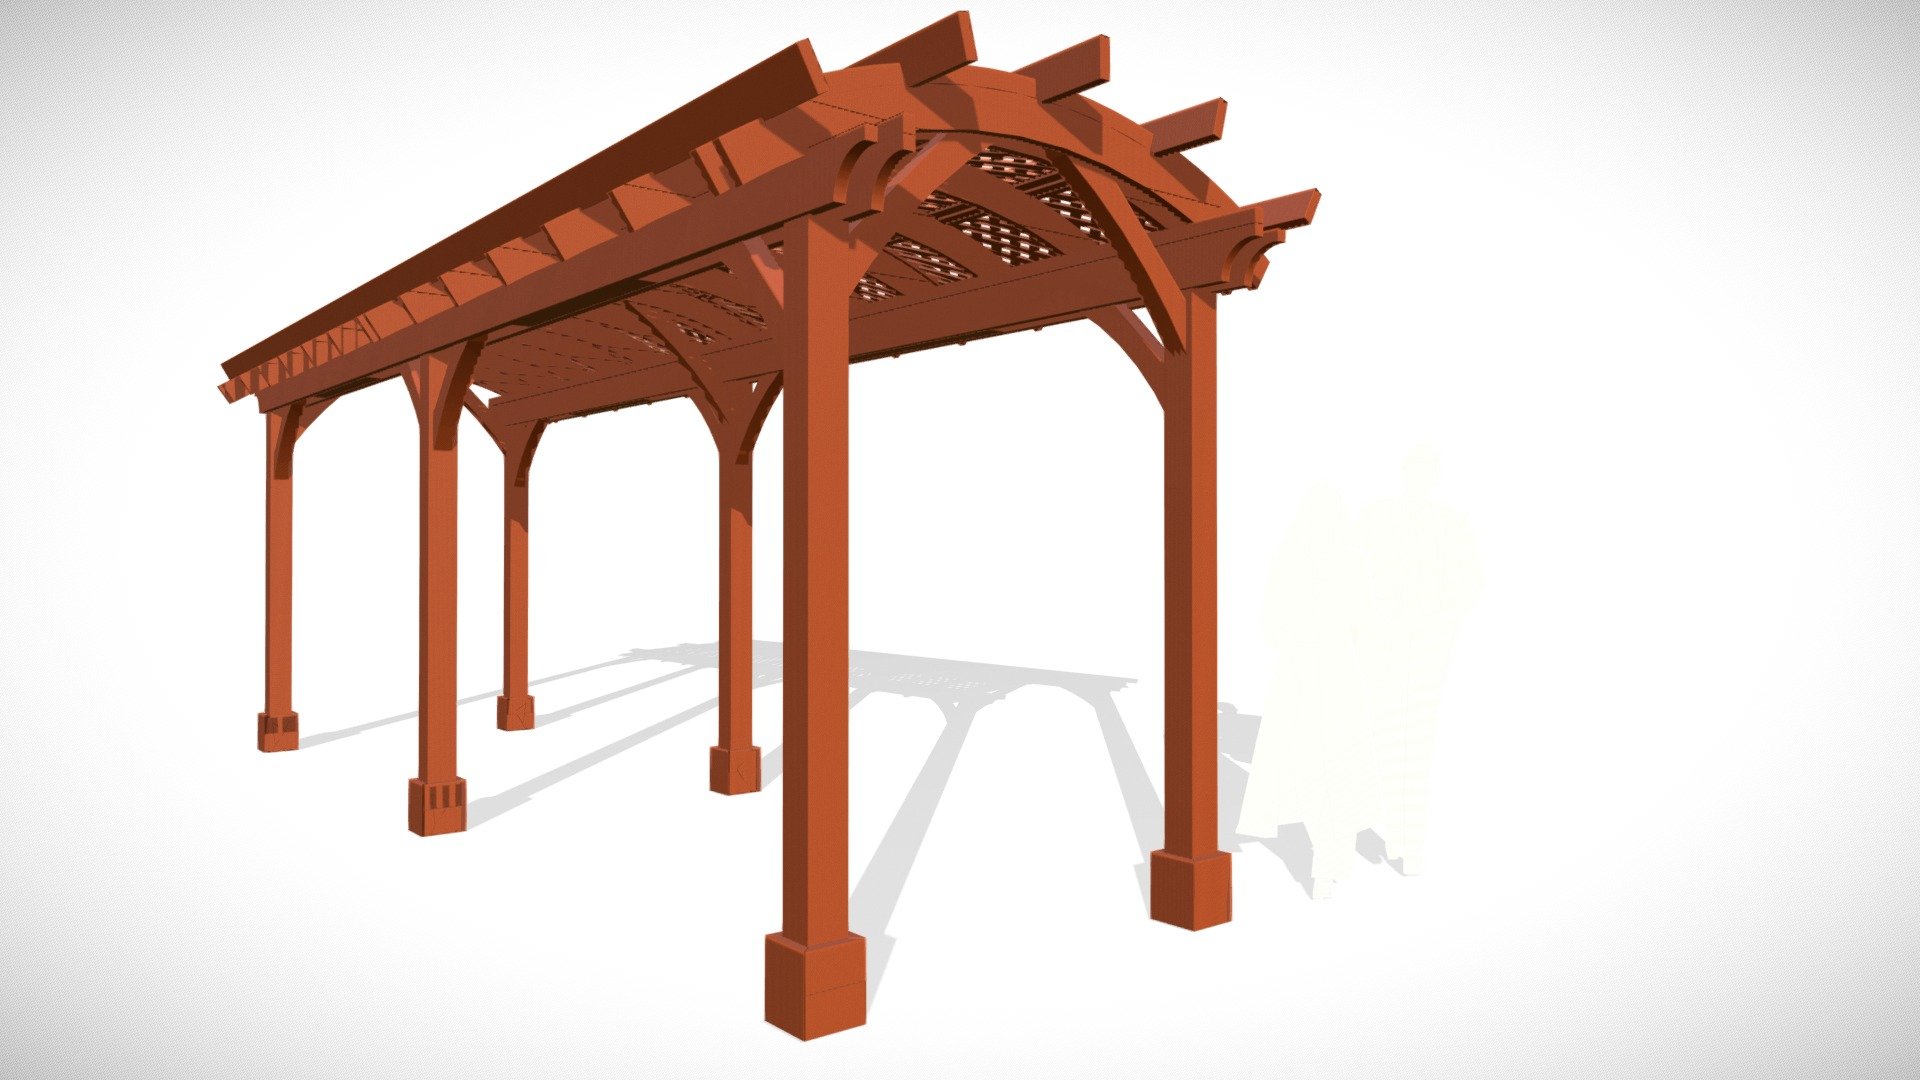 Arched Pergola Kits 25'L x 8'W
6x6 Posts
9'H Posts

Drawn by Jessica López Matus
7/11/2022

More like this at
https://www.foreverredwood.com/arched-pergola-kits.html?search=arched - Arched Pergola Kits 25'L x 8'W - 3D model by Forever Redwood Engineering Team 3d model